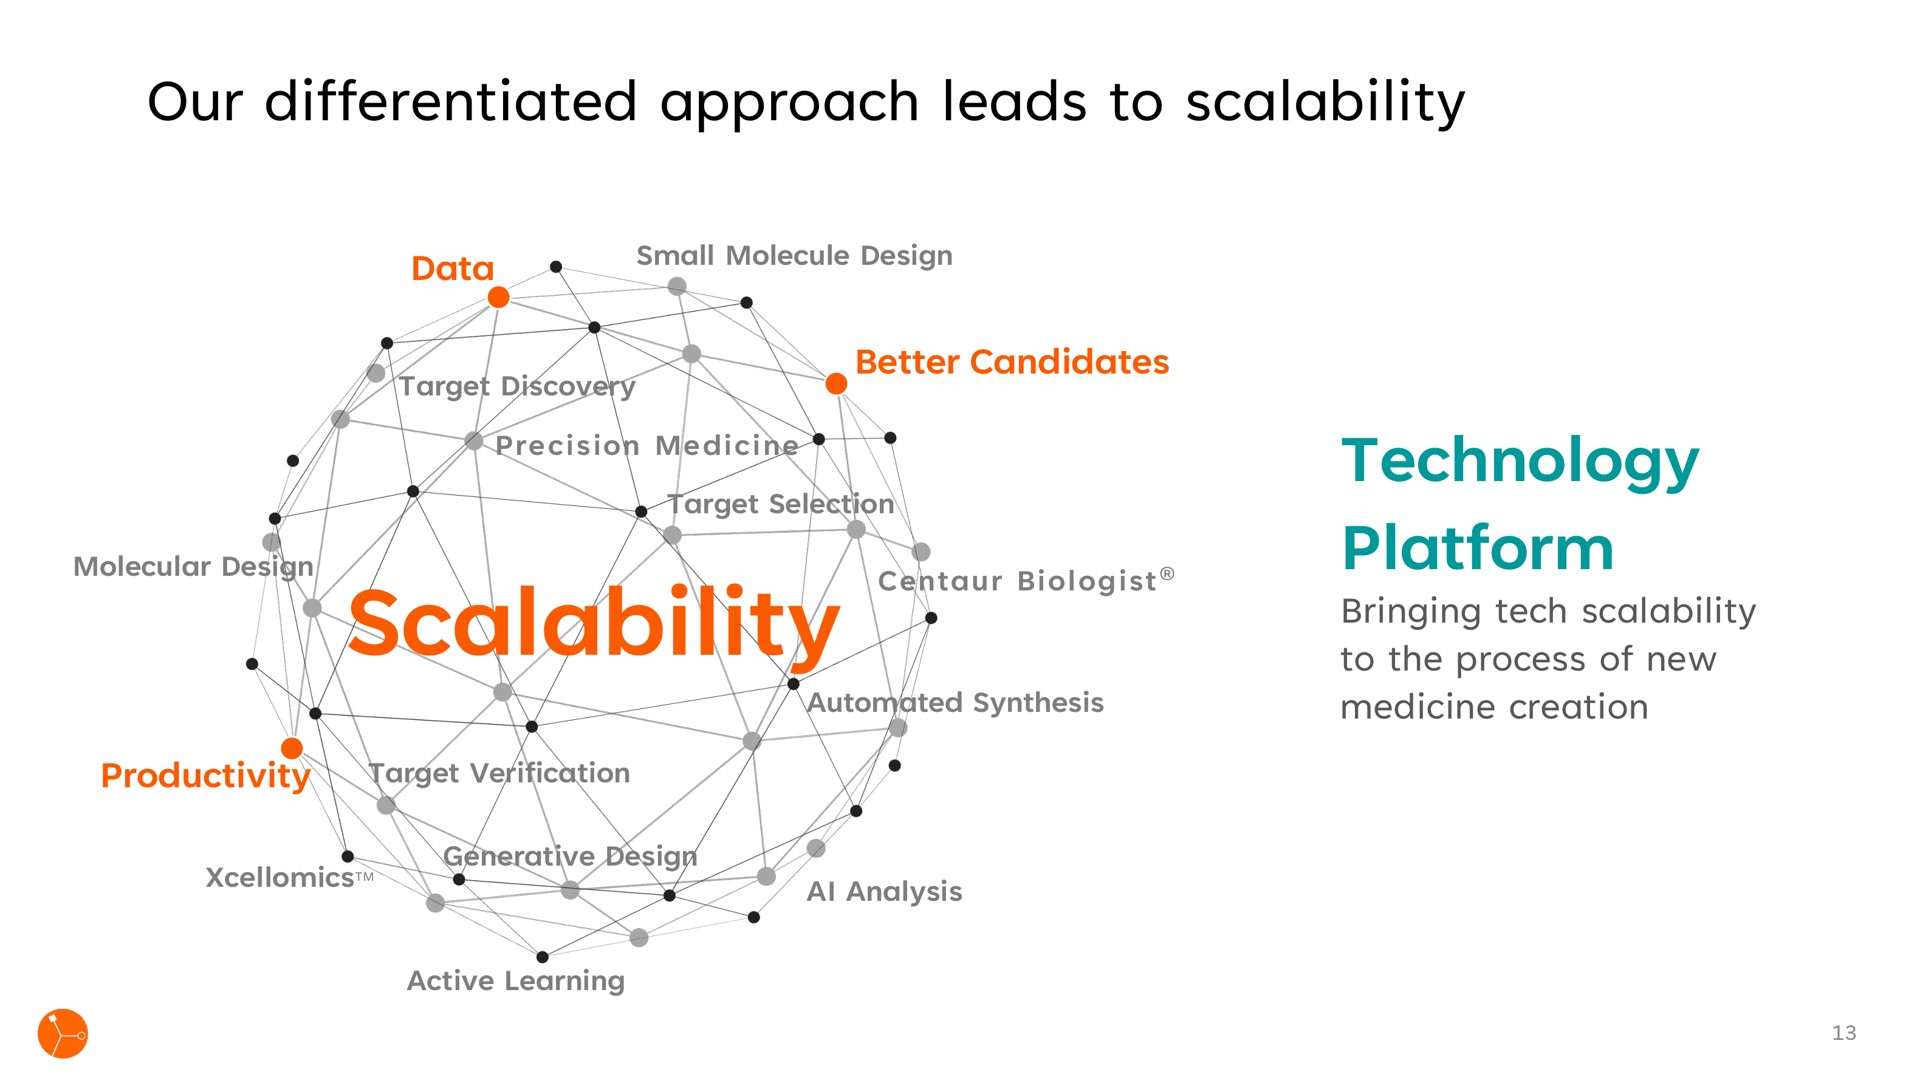 our differentiated approach leads to technology platform a | Exscientia